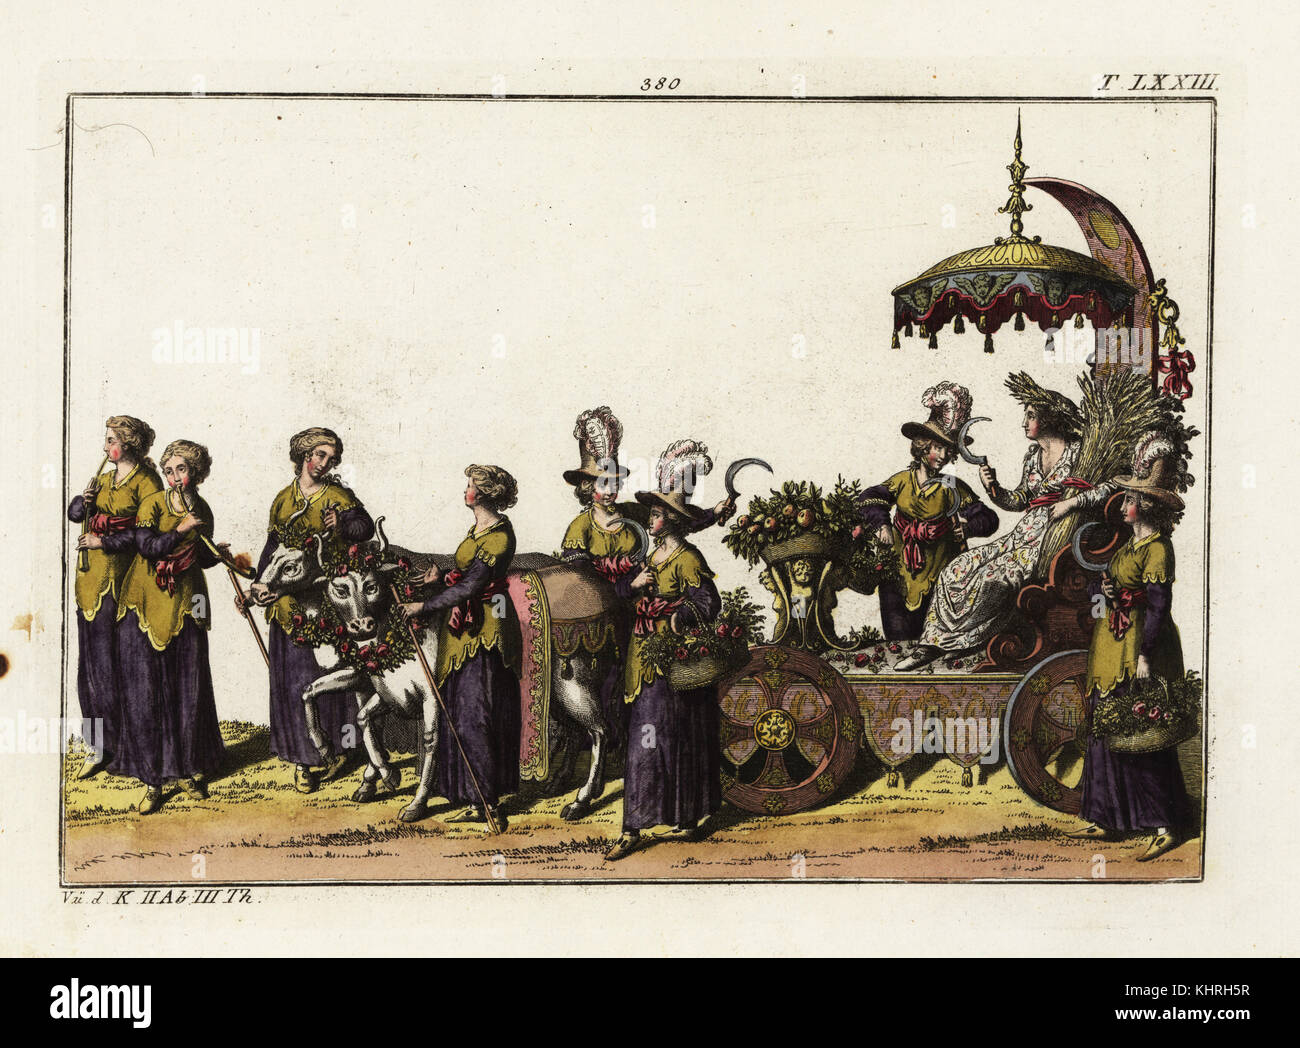 A triumphal carriage decorated with fruit and flowers from the harvest accompanied by female reapers (Schnitterinnen) holding scythes. A woman with a bushel of wheat sits on a throne. Part of the celebration of the birth of Freiderich, Duke of Wurttemberg. Taken from Delineation und Abbildung aller furstlichen Aufzug und Ritterspielen by Esaias von Hulsen, 1617. Handcoloured copperplate engraving from Robert von Spalart's Historical Picture of the Costumes of the Principal People of Antiquity and of the Middle Ages, Chez Collignon, Metz, 1810. Stock Photo